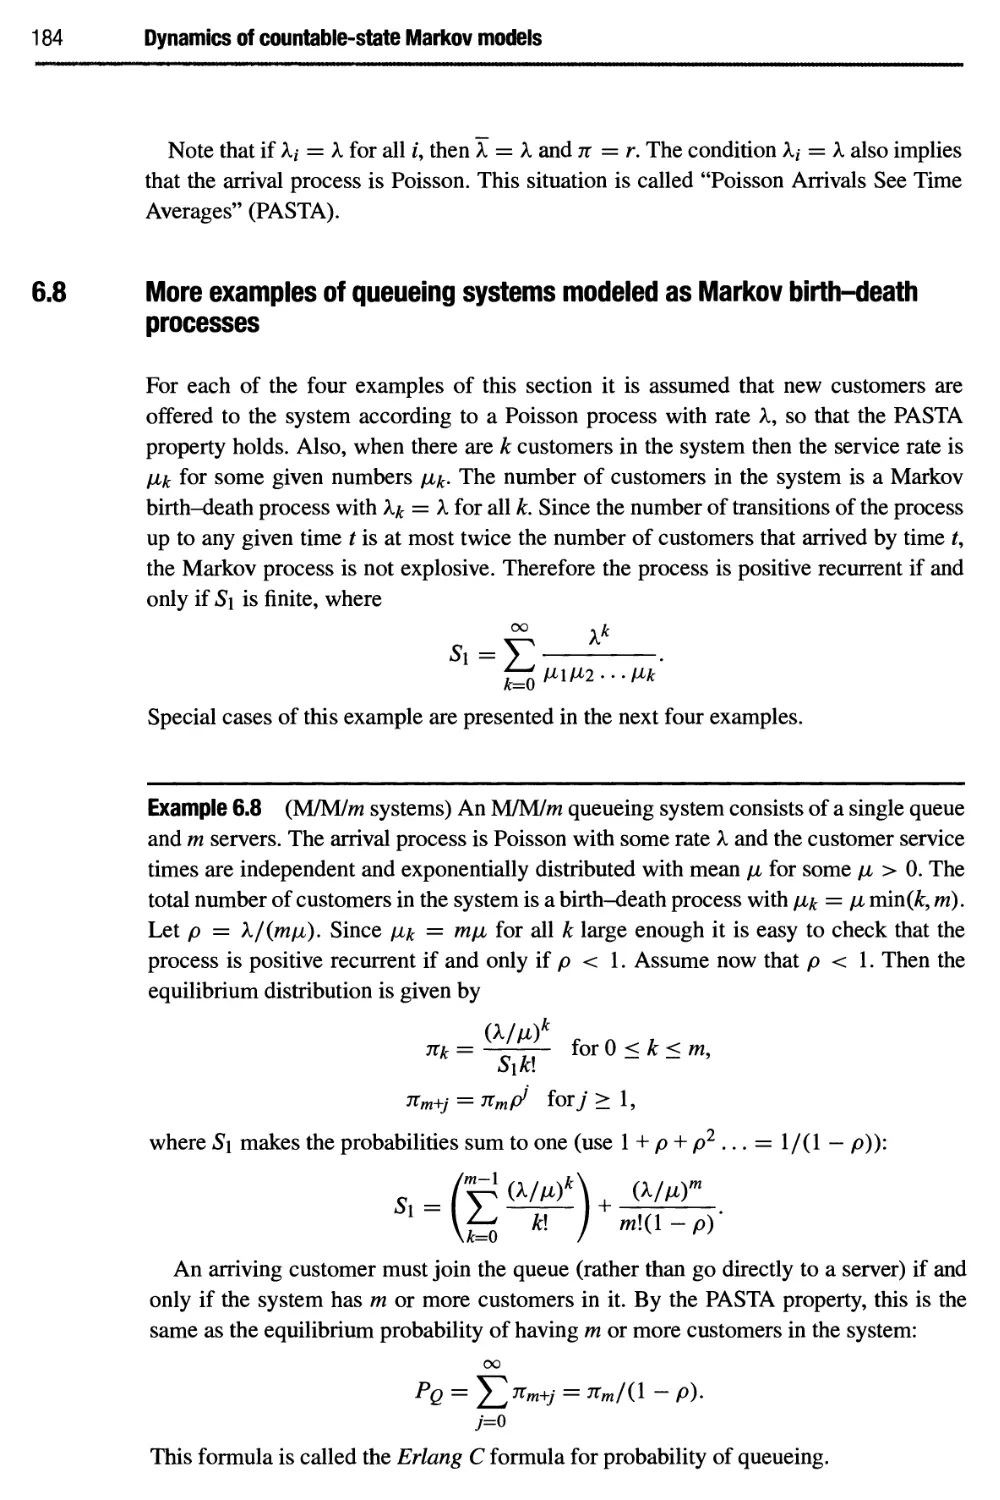 6.8 More examples of queueing systems modeled as Markov birth-death processes 184